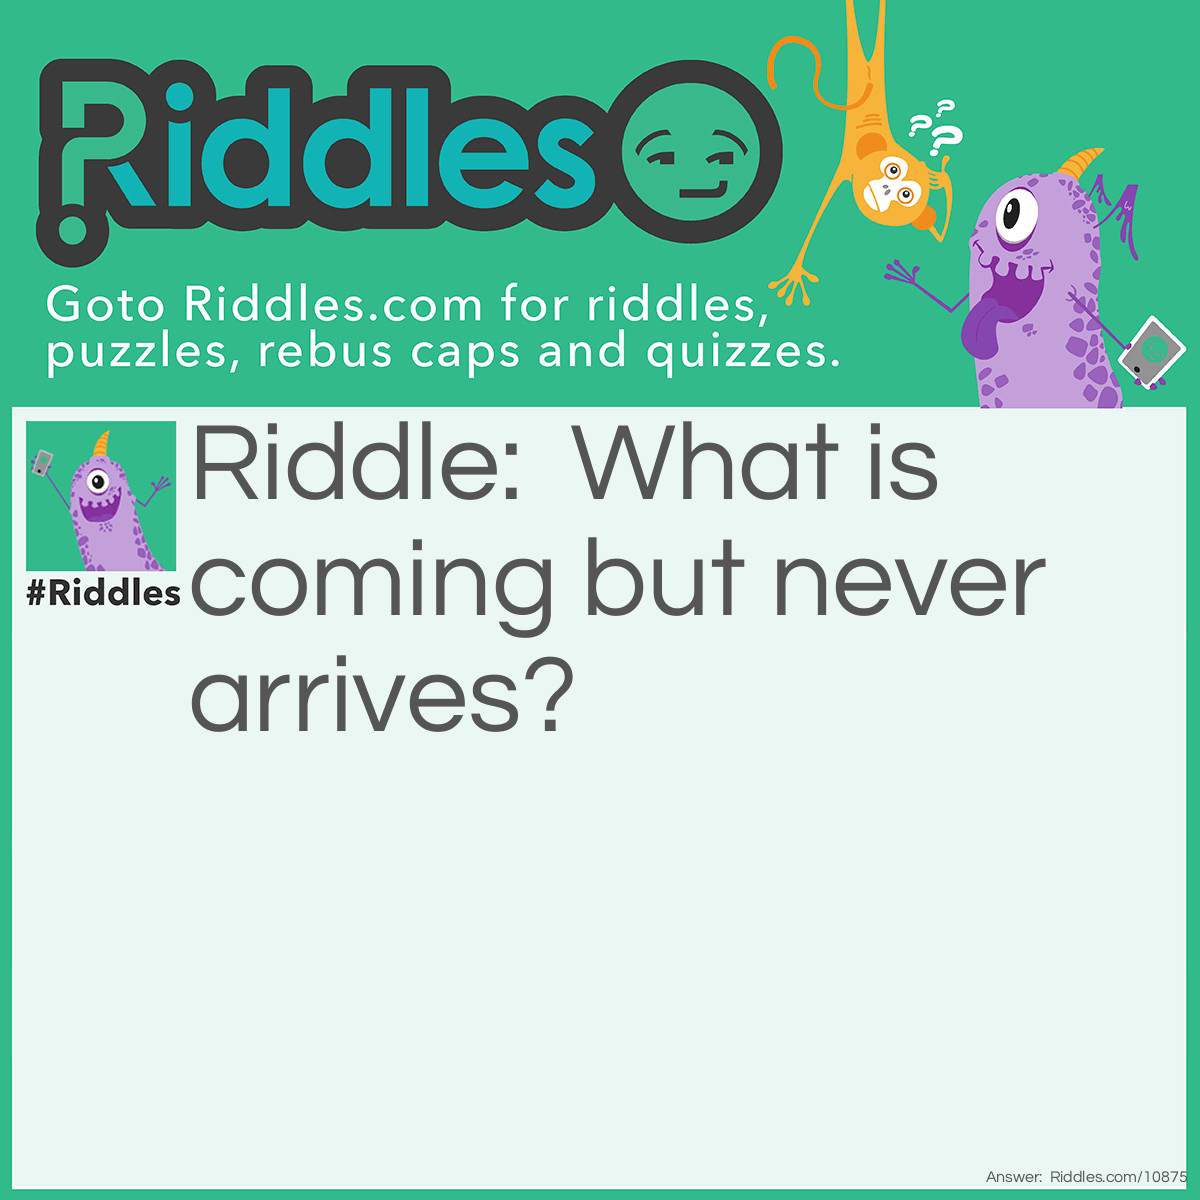 Riddle: What is coming but never arrives? Answer: Tomorrow.